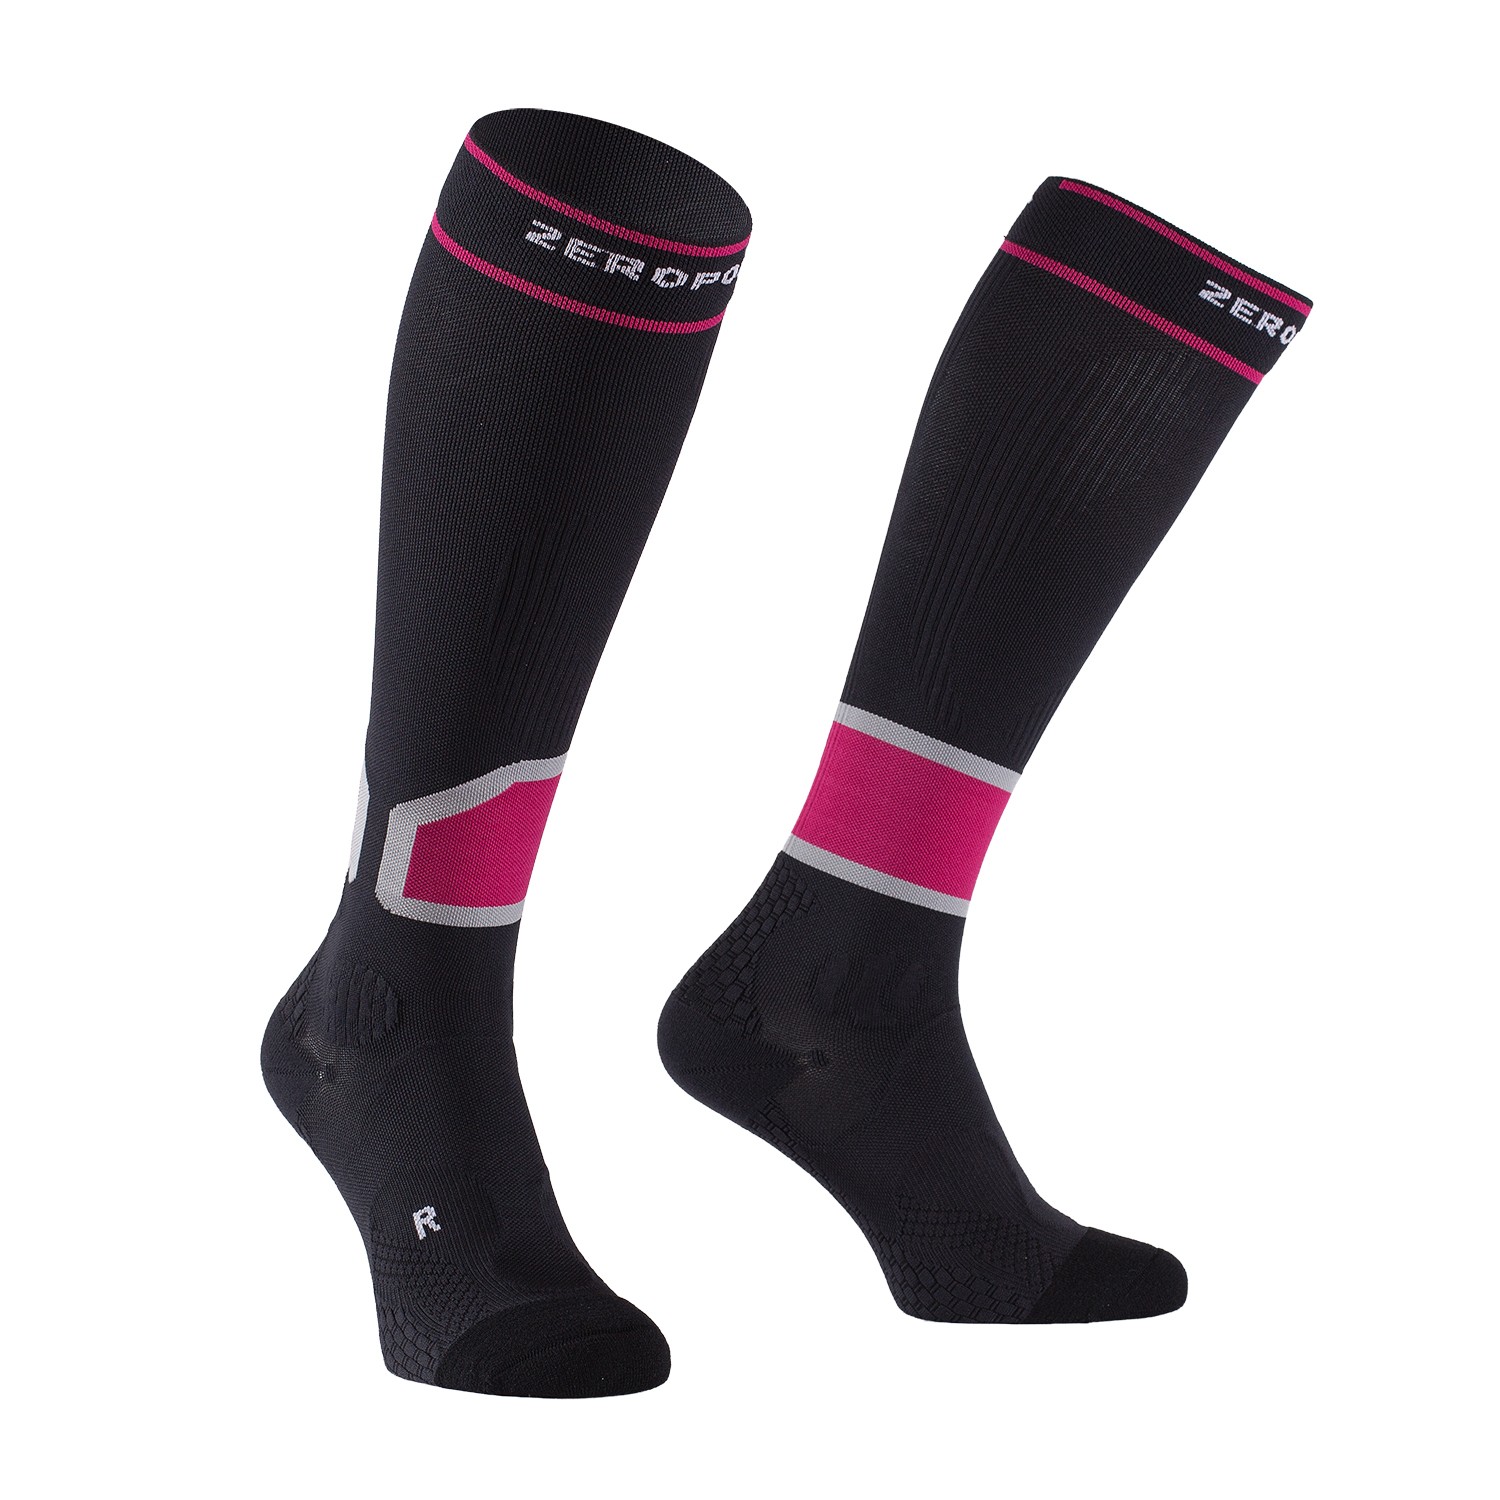 INTENSE 2.0 COMPRESSION SOCK DARK GREY AND PINK - Harris Active Sports ...